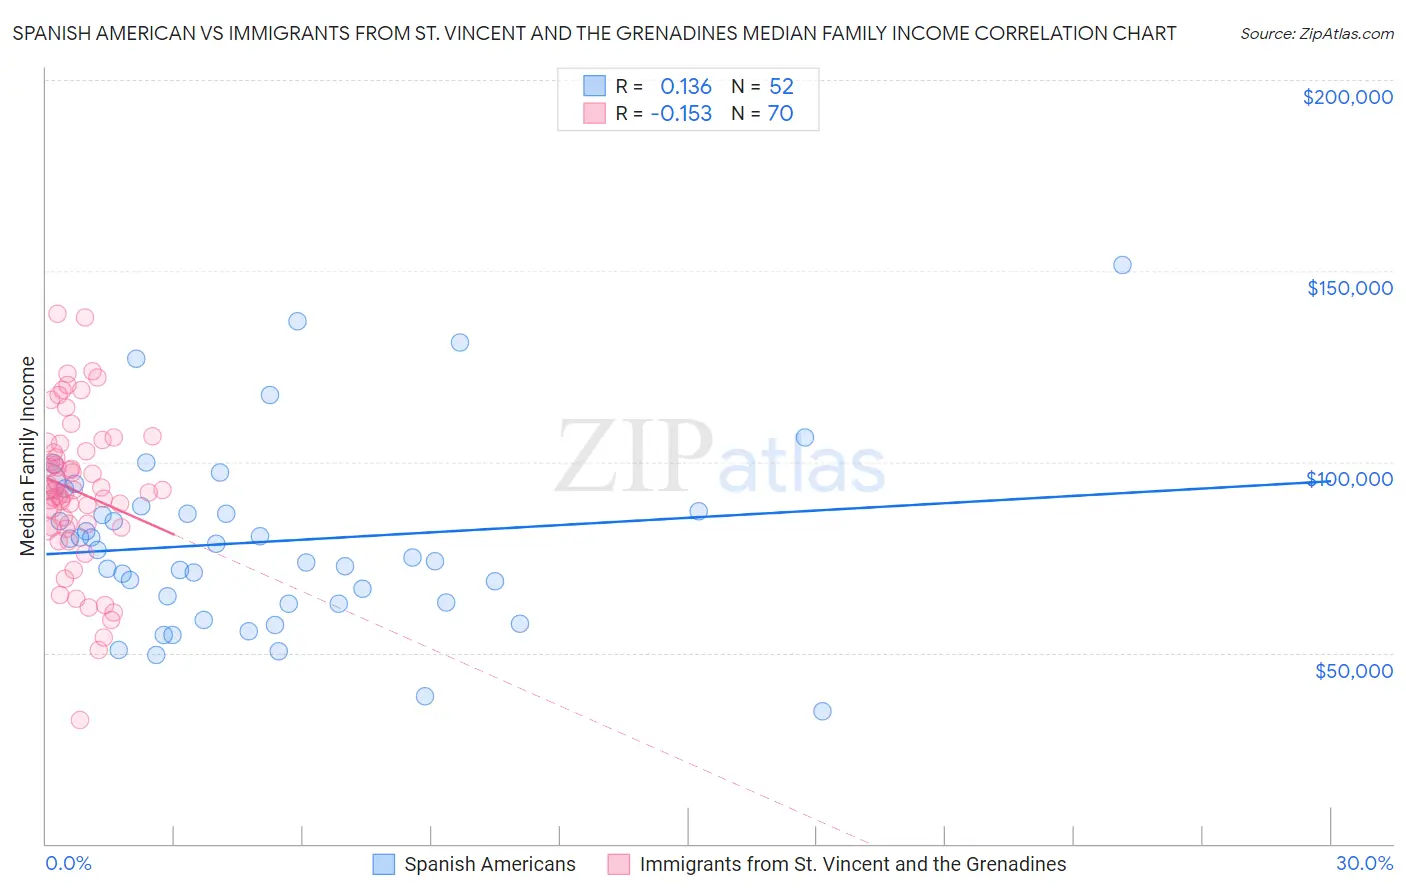 Spanish American vs Immigrants from St. Vincent and the Grenadines Median Family Income